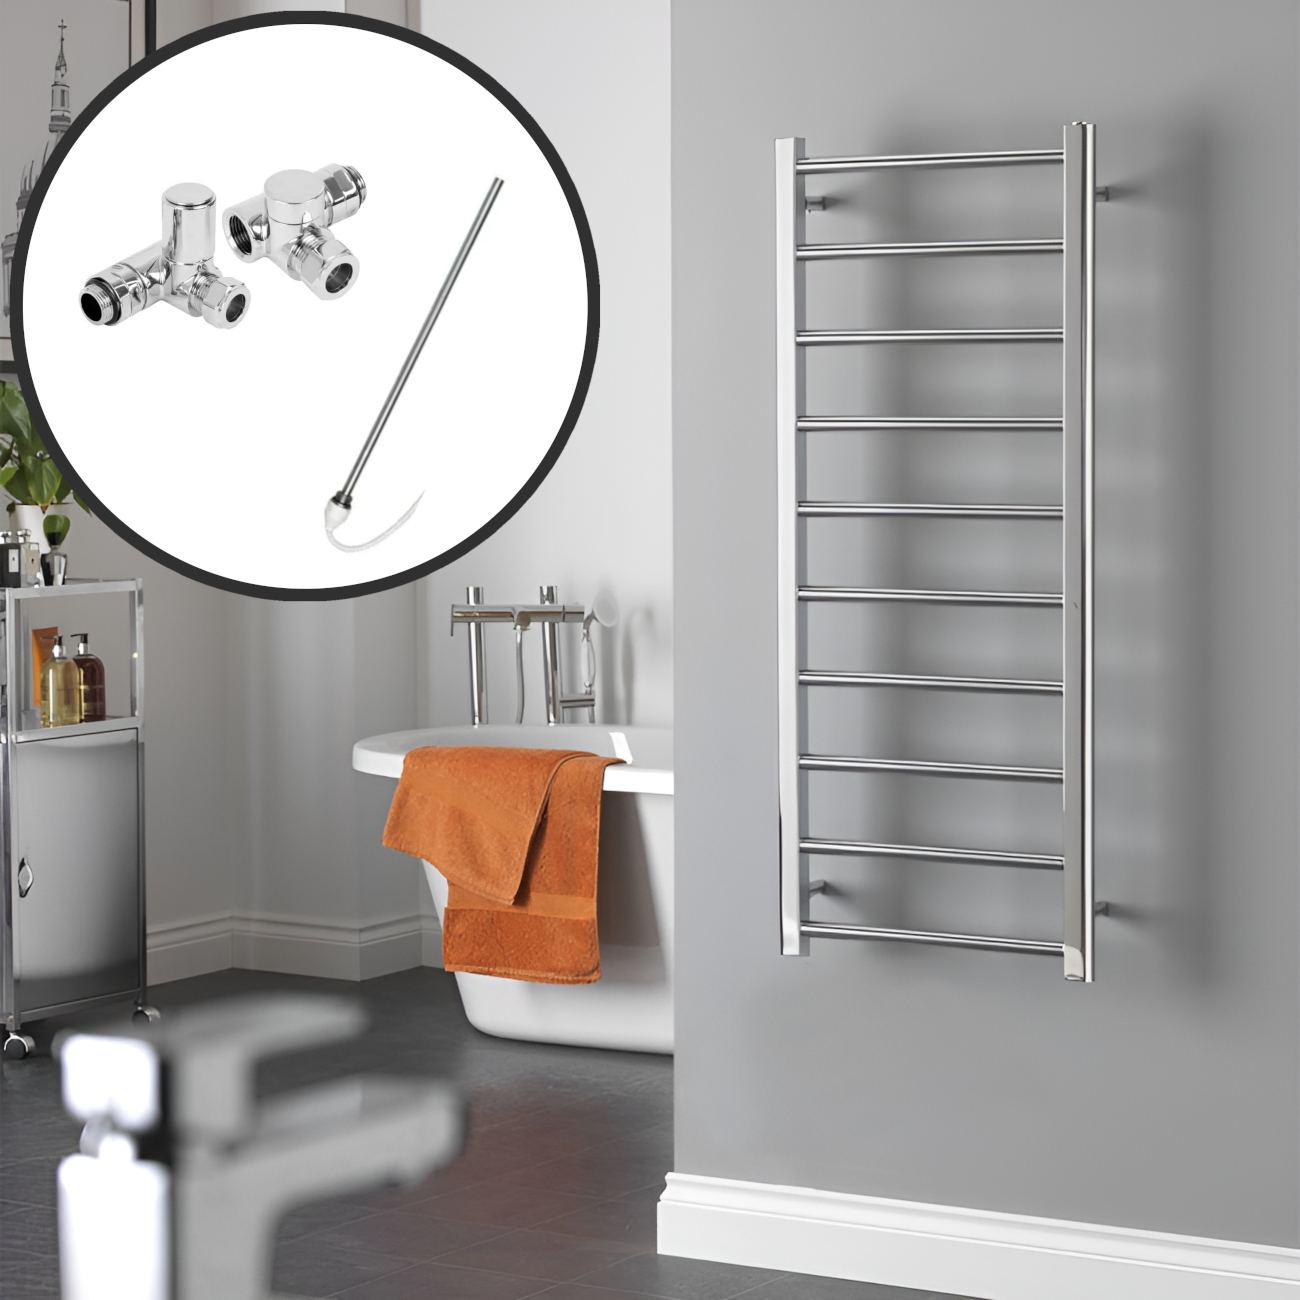 Alpine Chrome Modern Towel Warmer / Heated Towel Rail – Dual Fuel, Electric Best Quality & Price, Energy Saving / Economic To Run Buy Online From Adax SolAire UK Shop 2